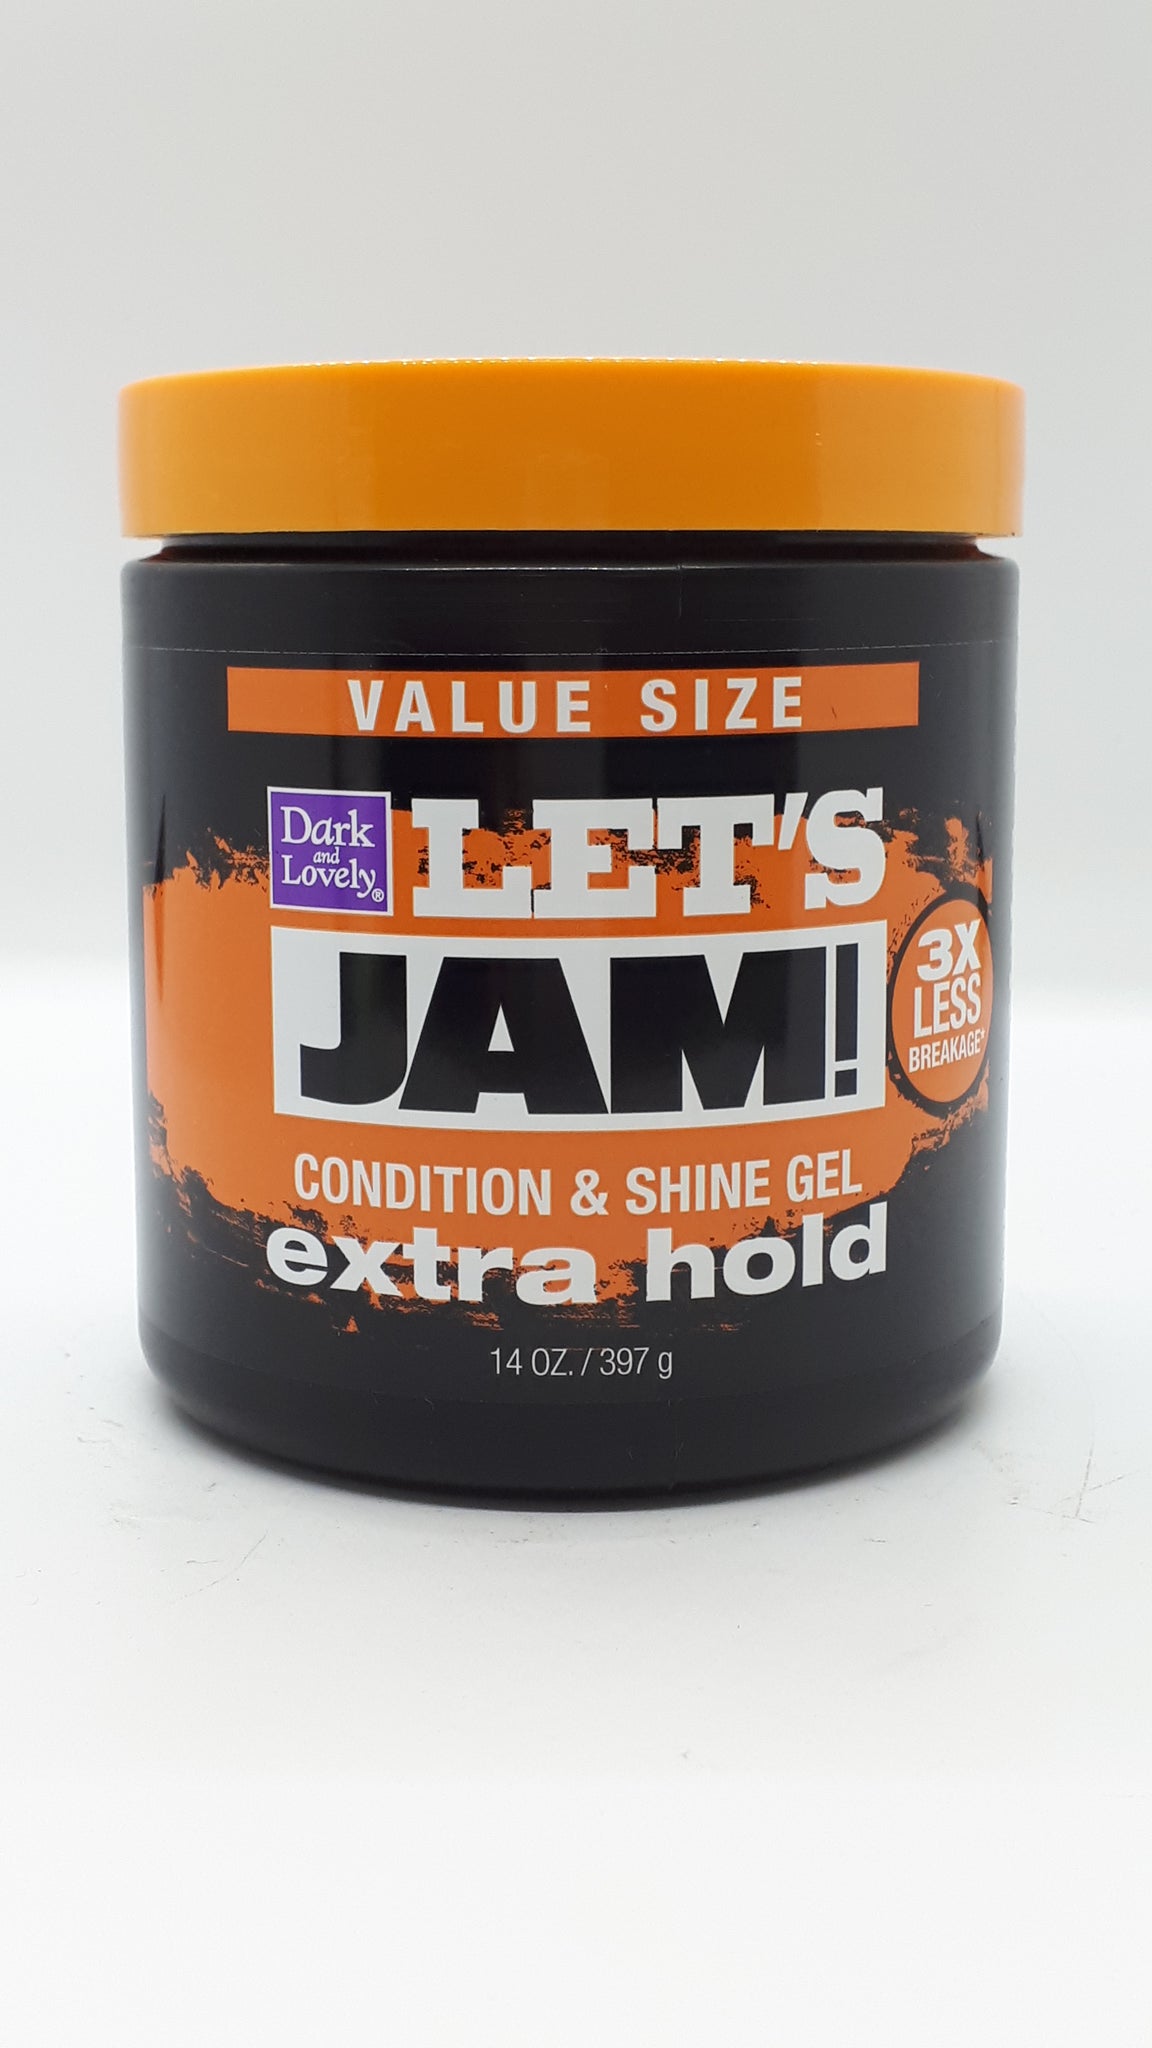 Let's Jam - Shining & Conditioning Gel Extra Hold 14oz